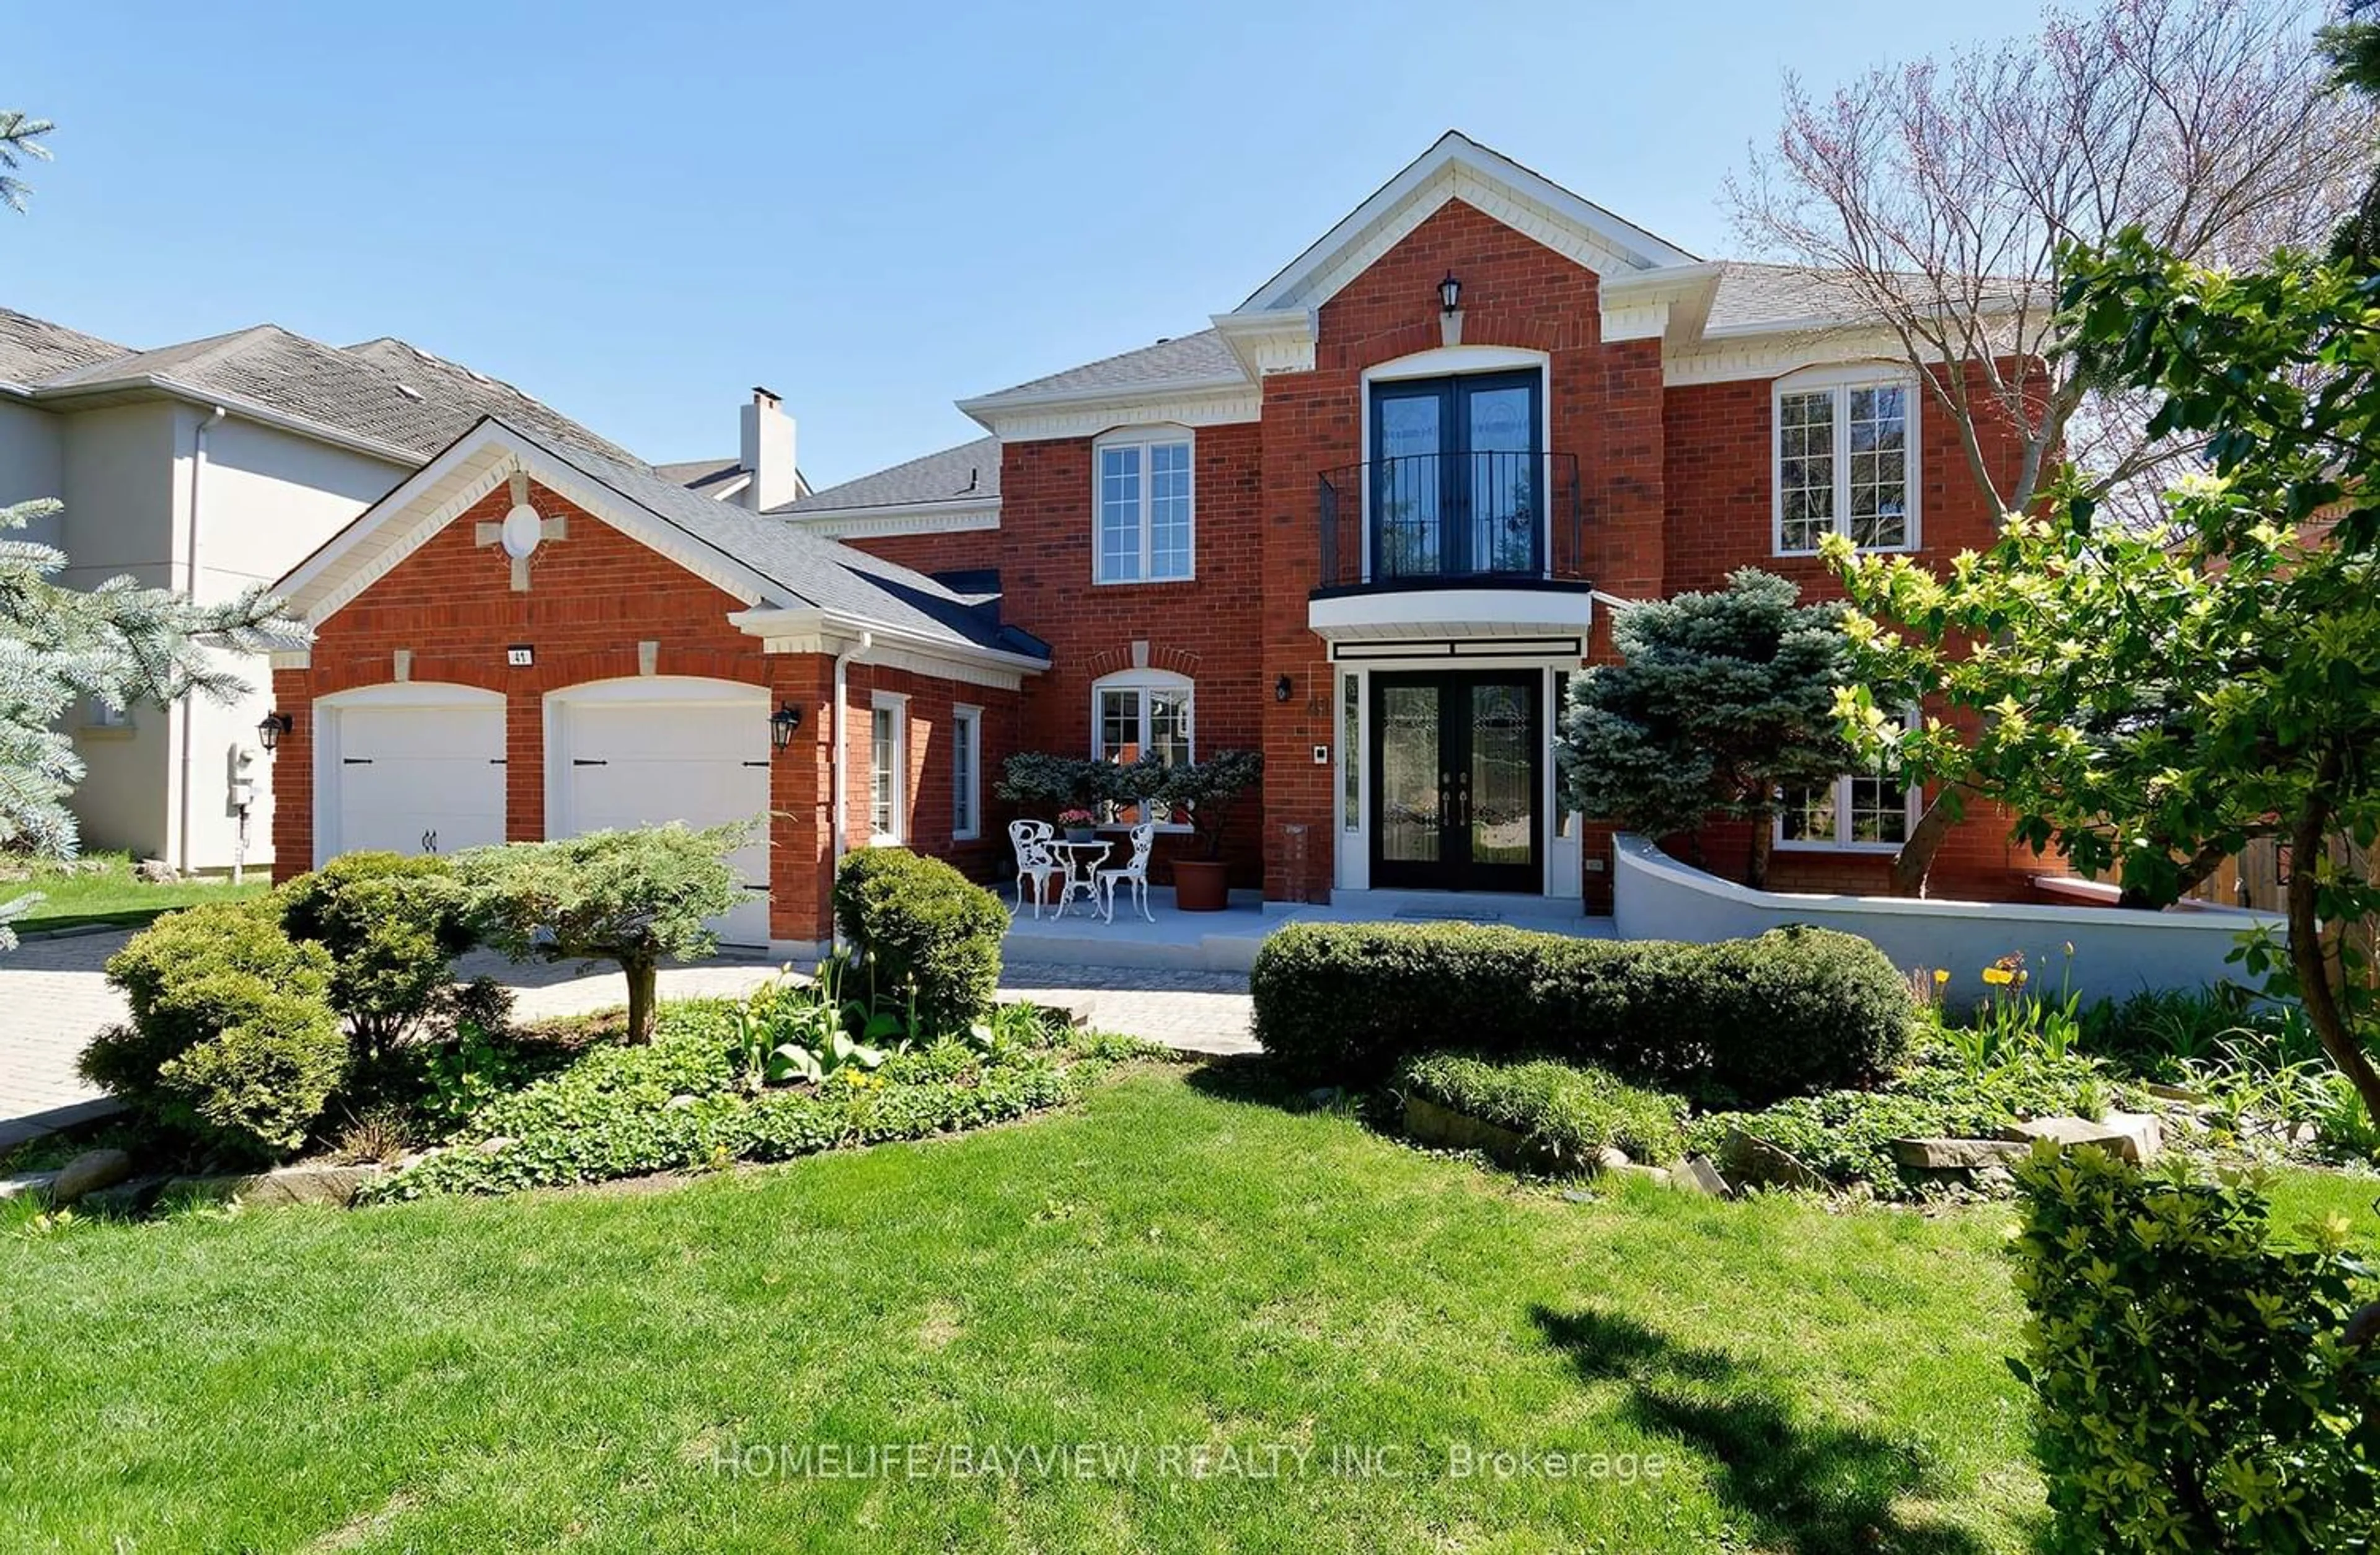 Home with brick exterior material for 41 Glenayr Rd, Richmond Hill Ontario L4B 2W4